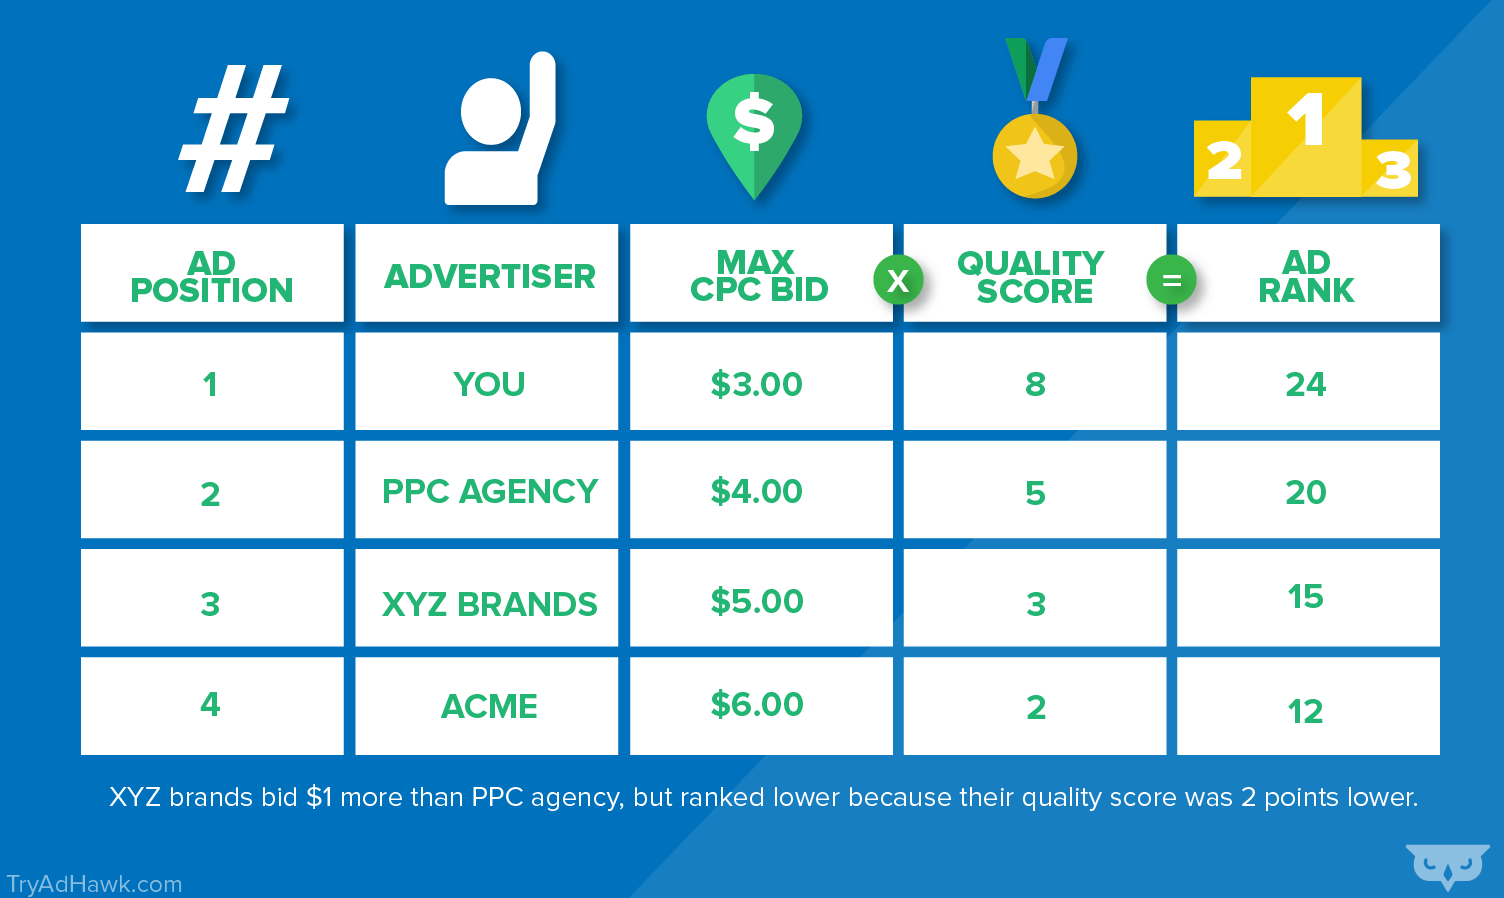 Image showing various advertisers, their maximum CPC bid, quality score and ad rank